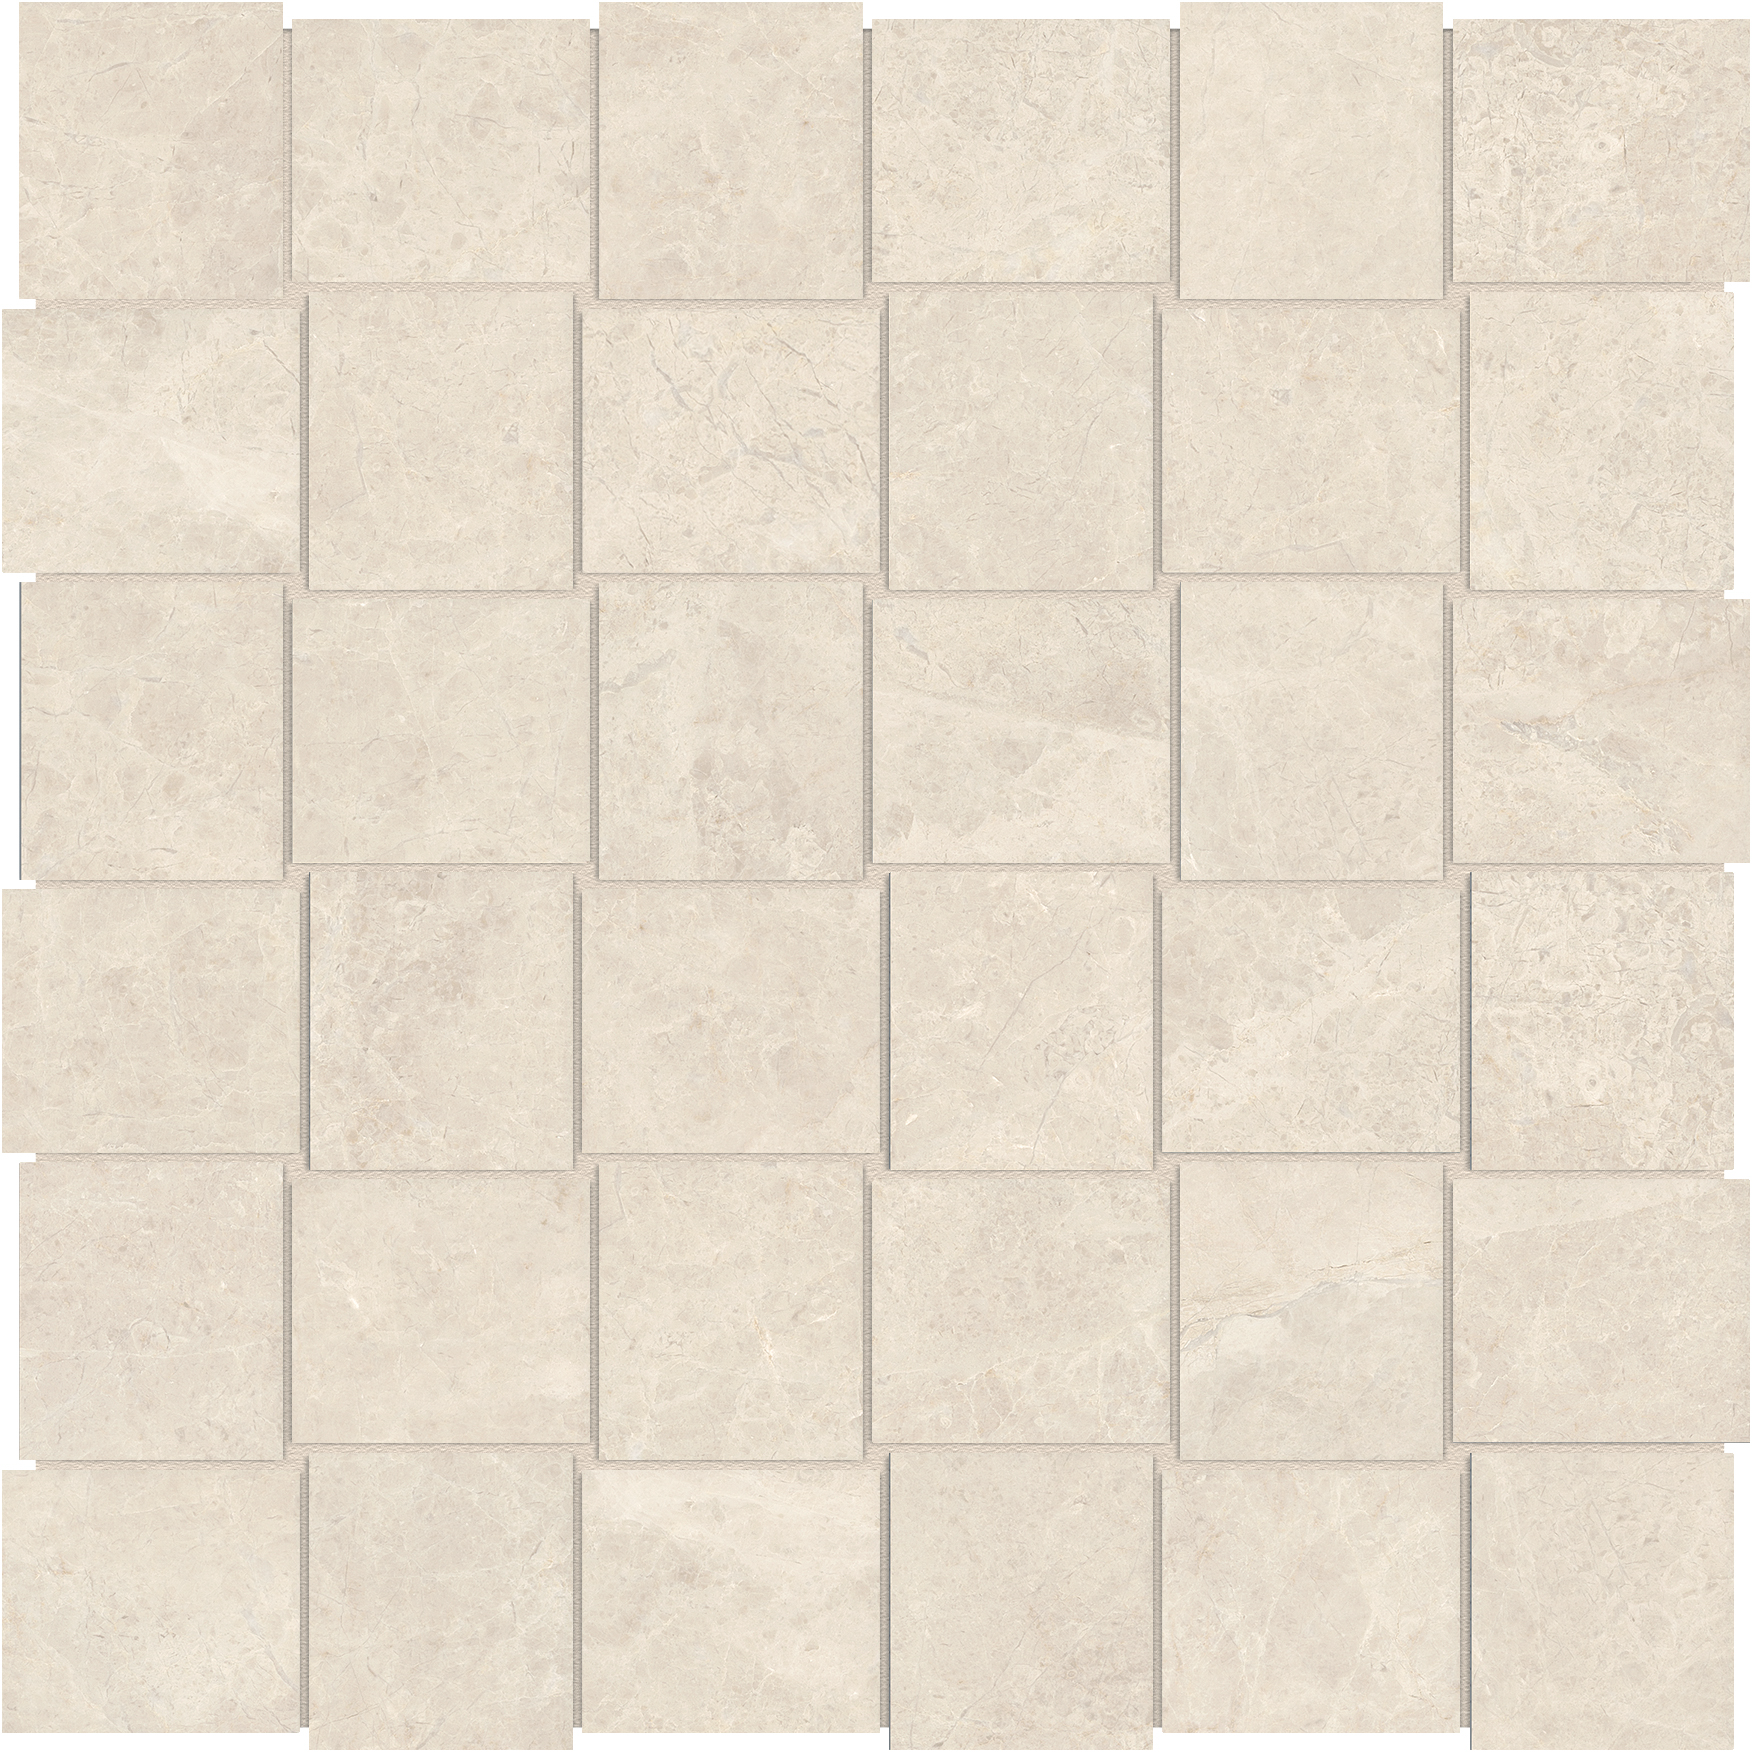 allure ivory basketweave 2x2-inch pattern glazed porcelain mosaic from mayfair anatolia collection distributed by surface group international polished finish straight edge edge mesh shape